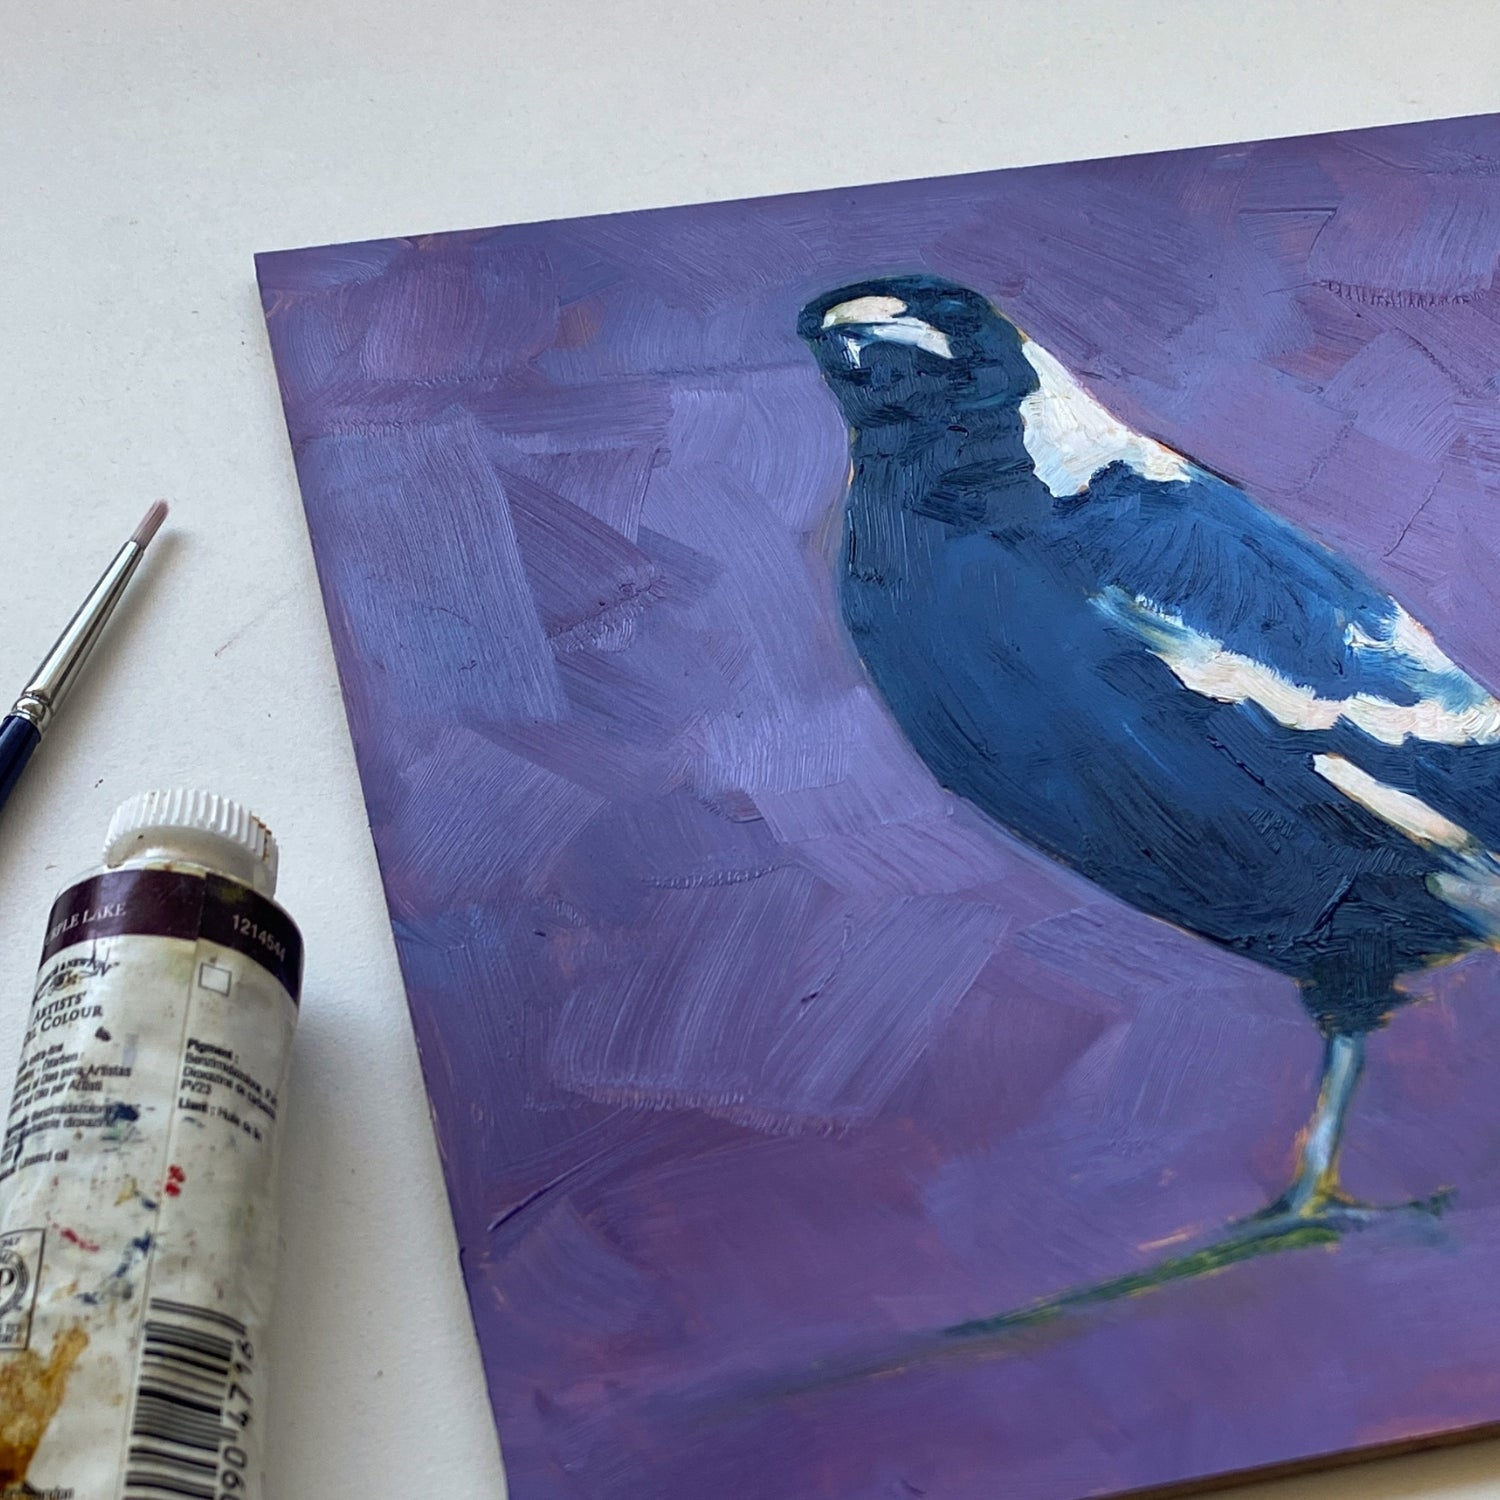 styling photo of a closeup of an original oil painting of a navy blue and white magpie with its head tilted on a bright and textured purple with bits of blue background. The painting is sitting on a white surface and there is a paintbrush and paint tube next to it.